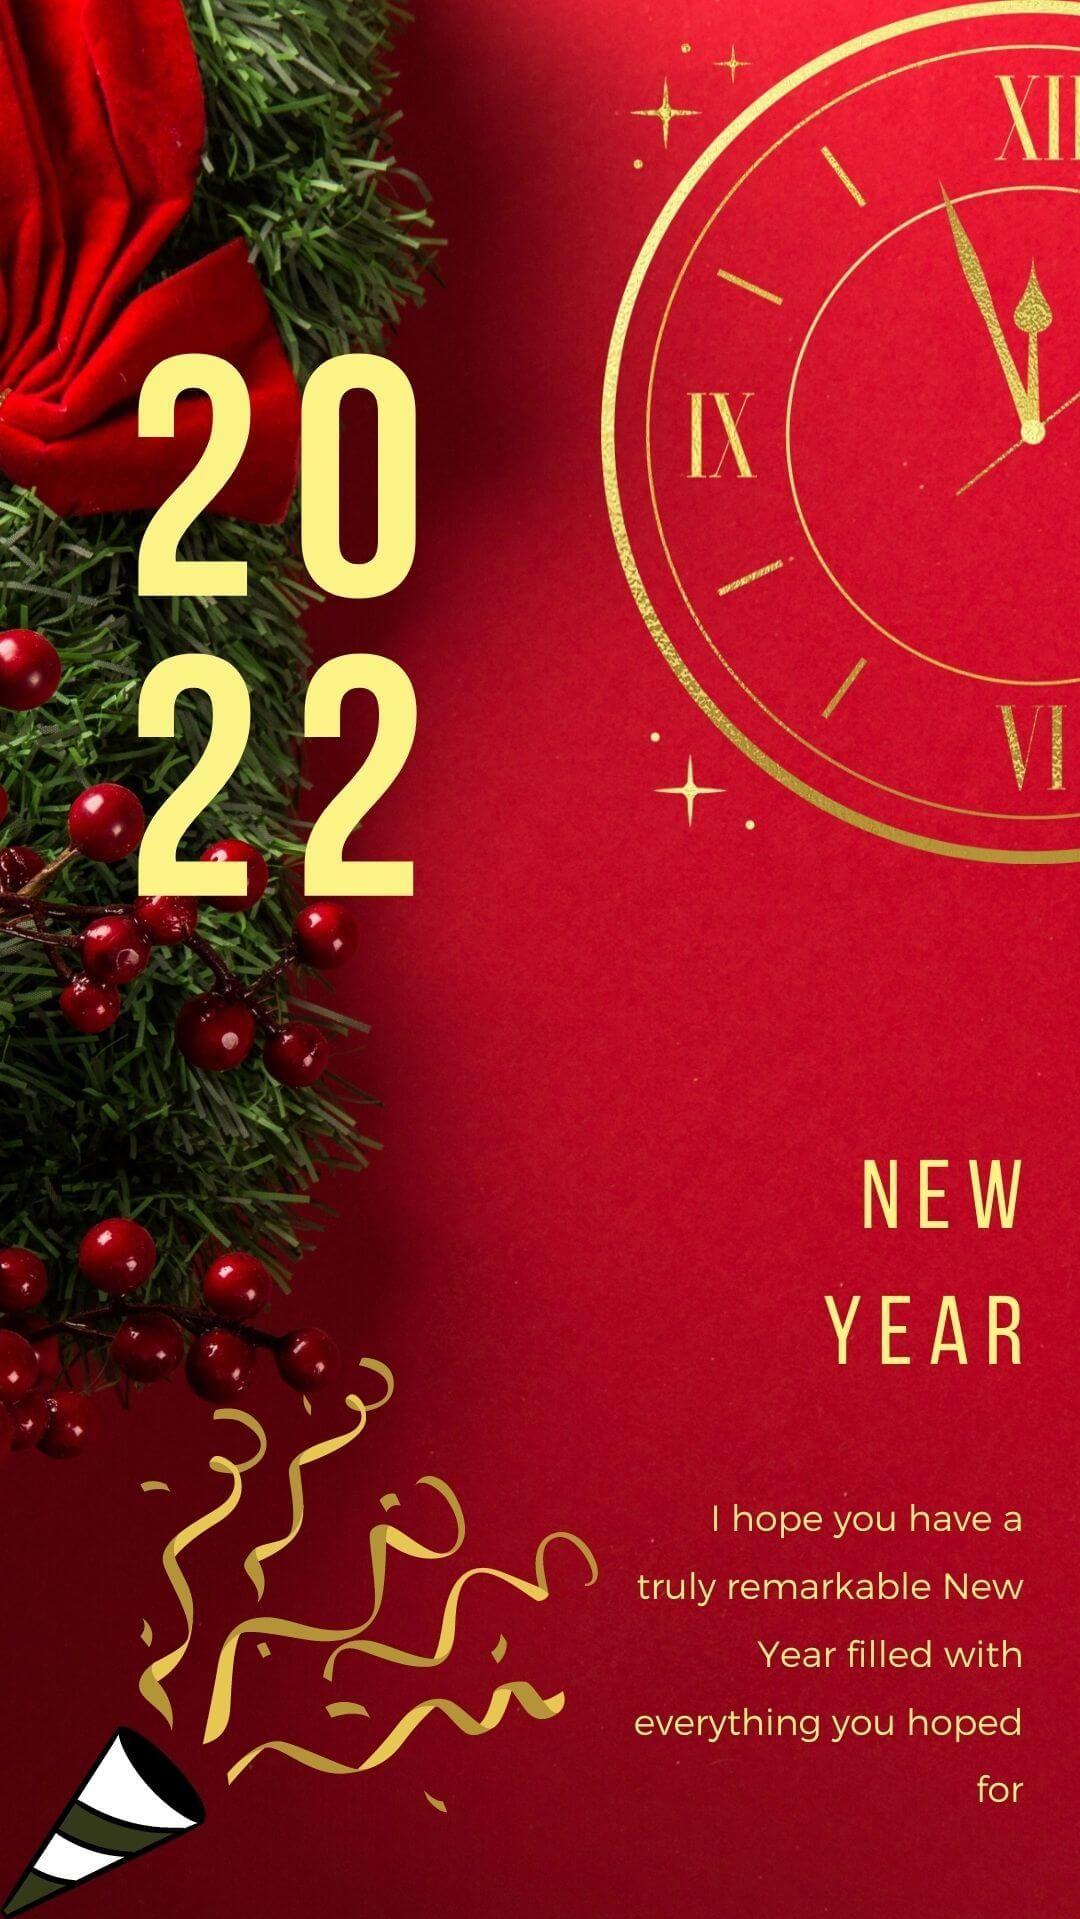 New Year Wallpaper And Image For iPhone iPad